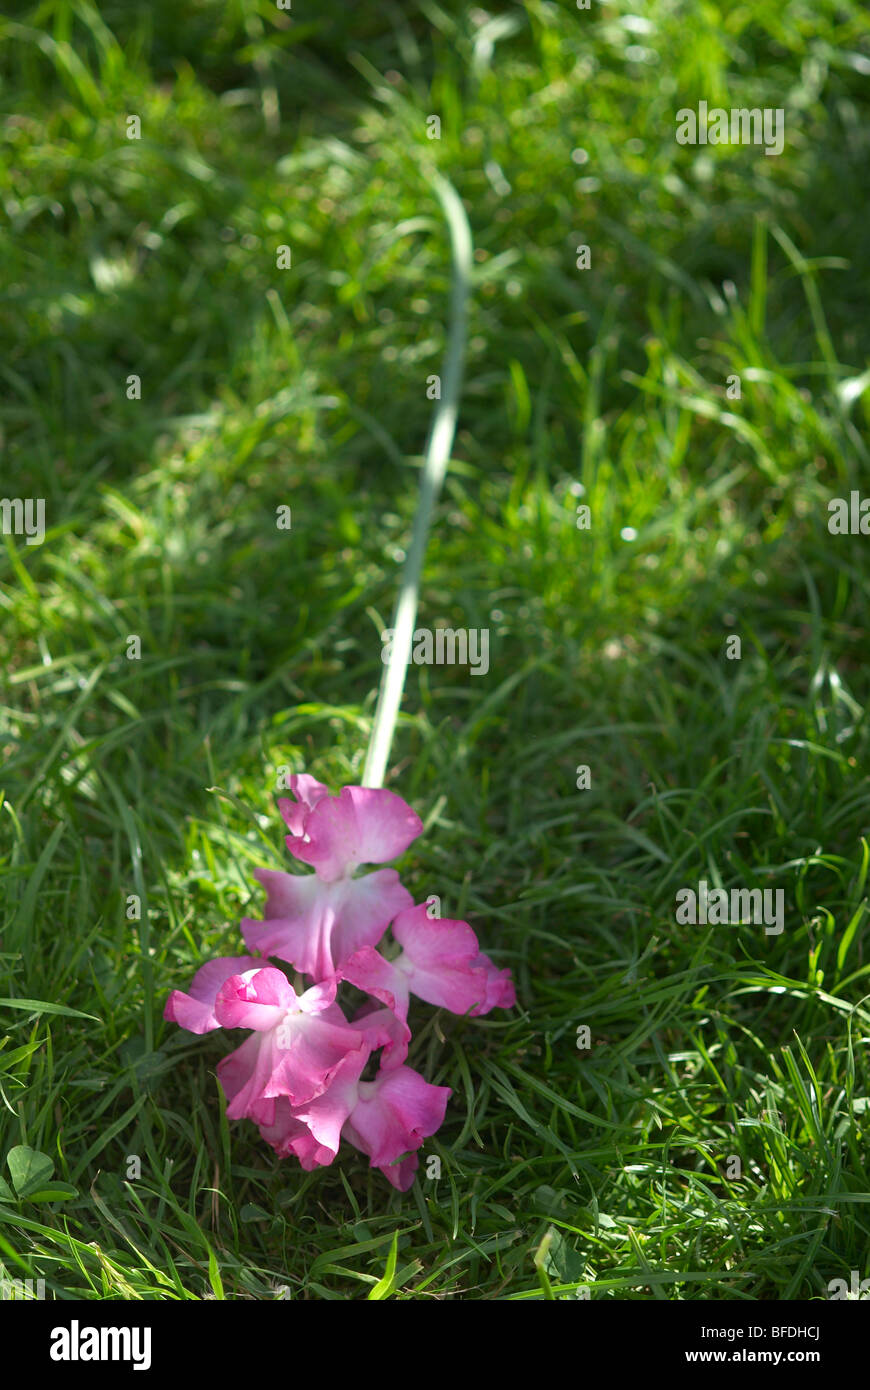 Flowering cut stem of a Sweet Pea plant Stock Photo